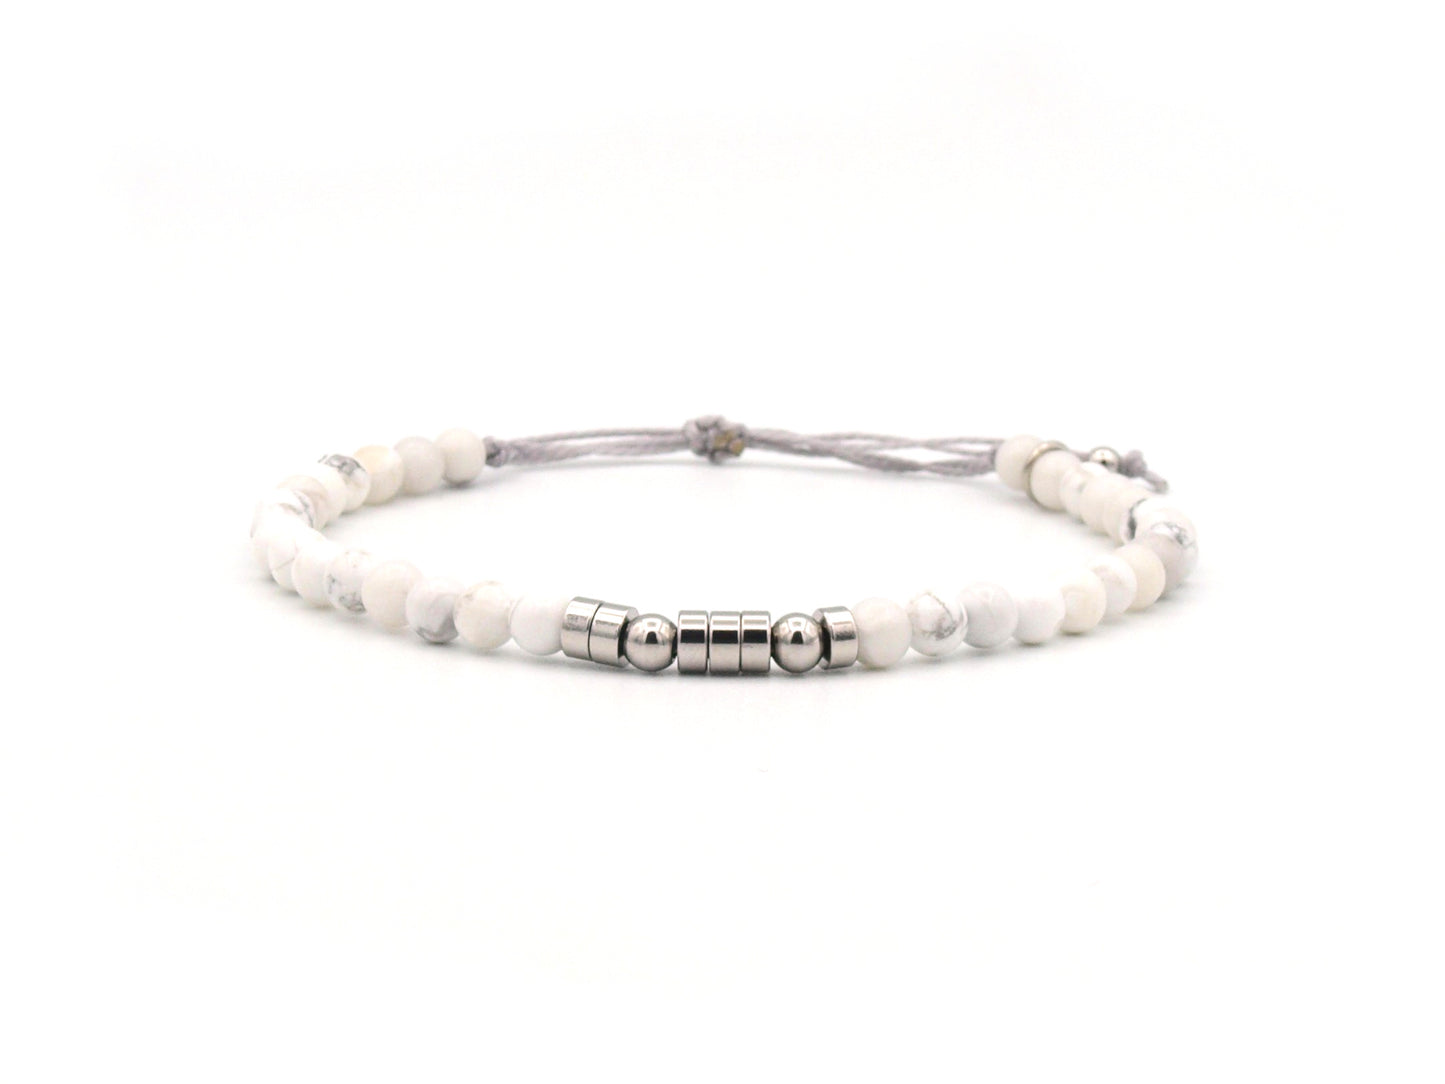 Personalized morse code bracelet, howlite and stainless steel